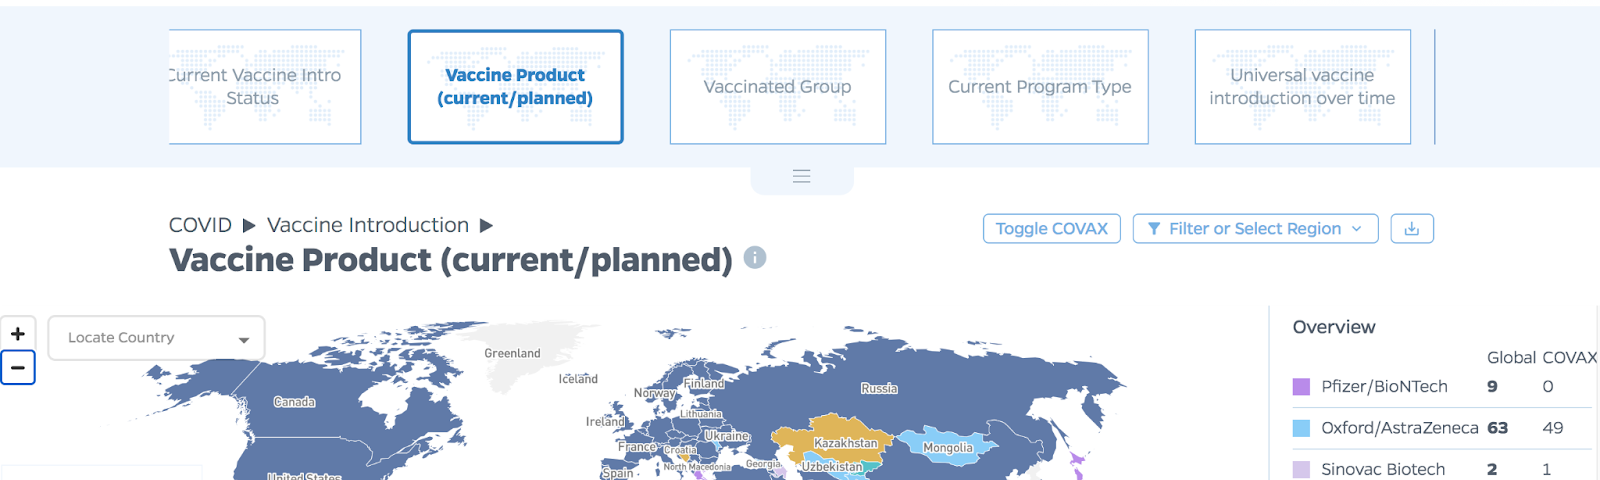 Map visualization of COVID-19 vaccination production.